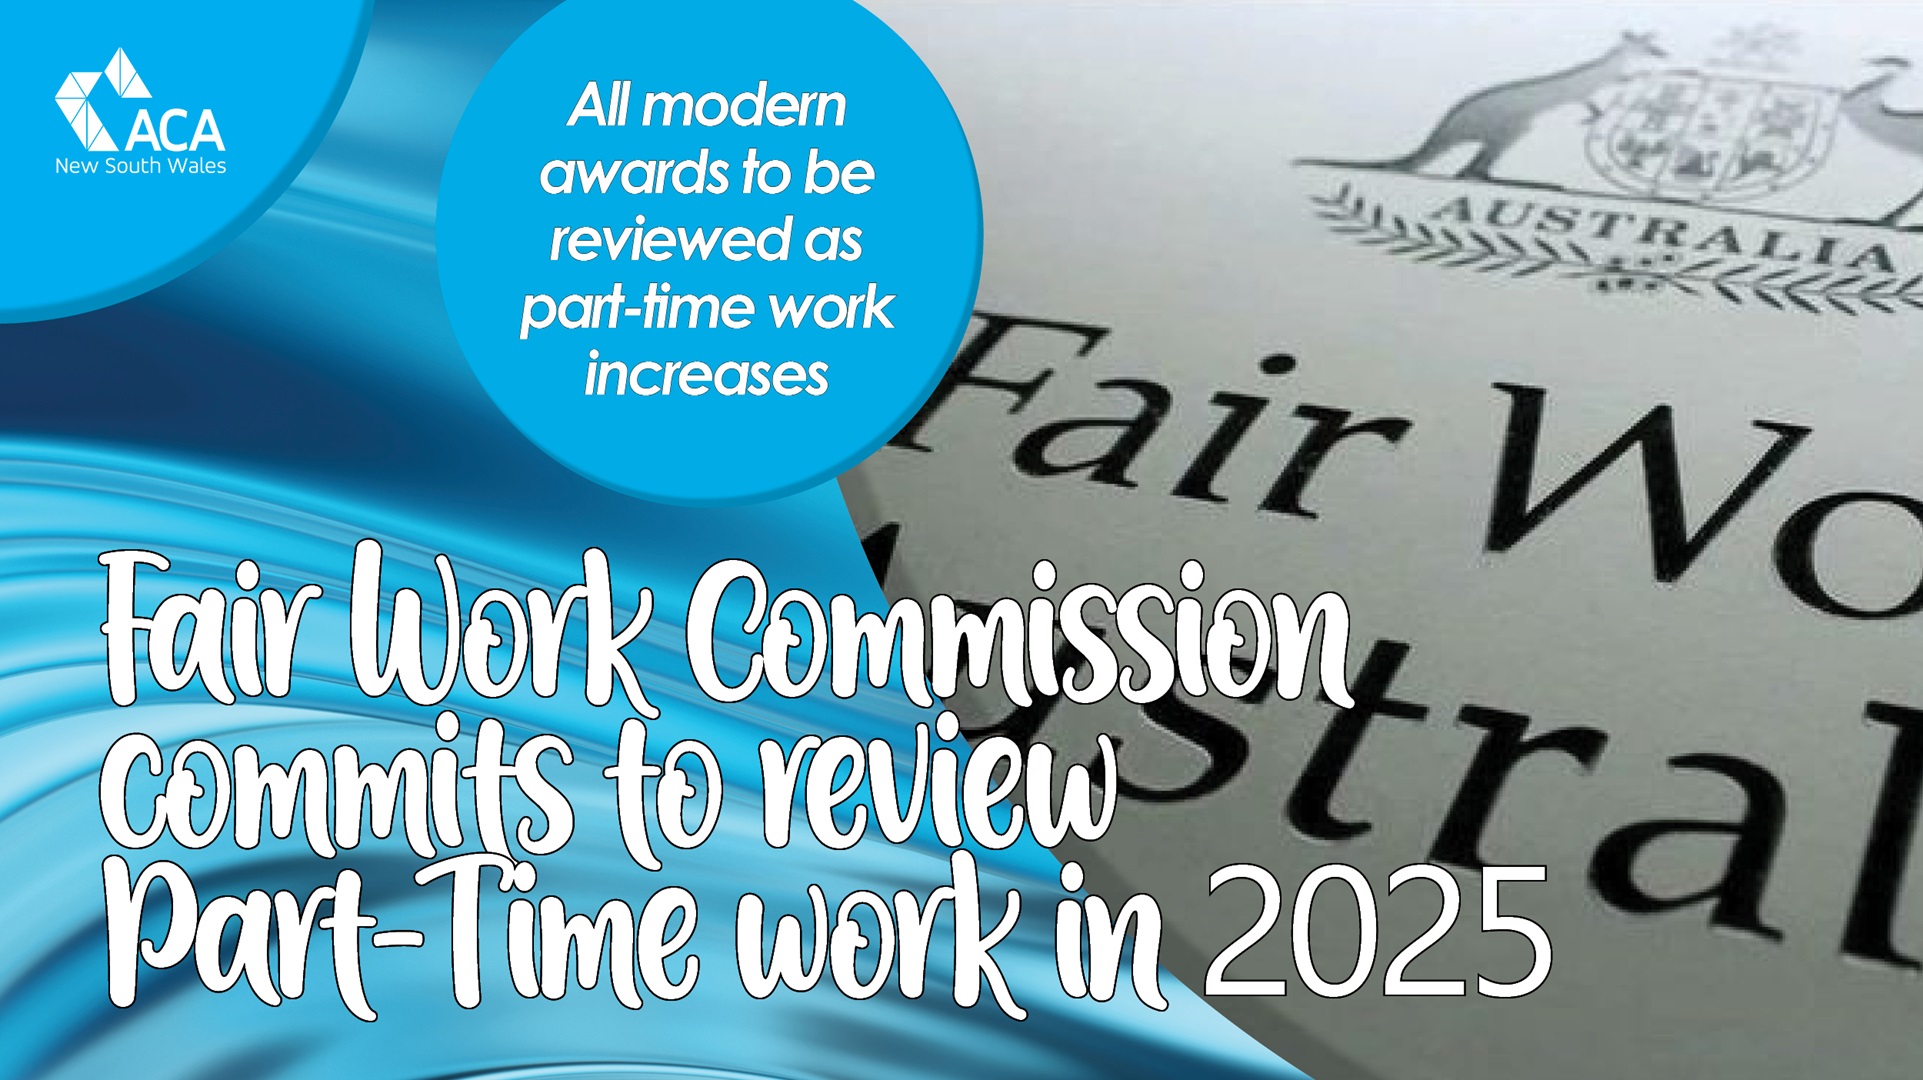 Fair Work Commission to review part-time work in 2025